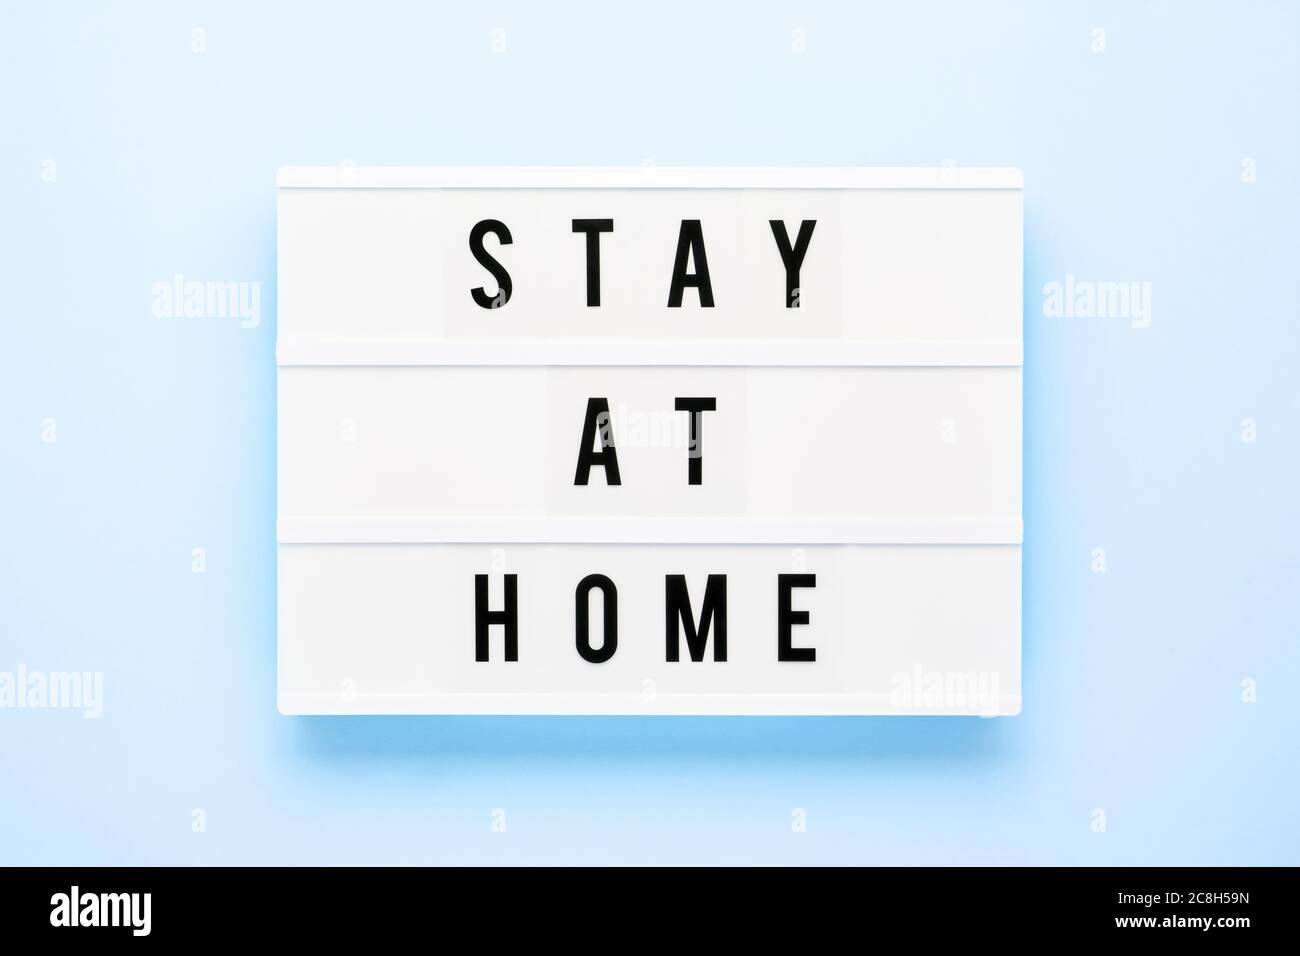 STAY AT HOME written in light box on blue background. Healthcare and medical concept. Top view, copy space. Quarantine concept. Stock Photo